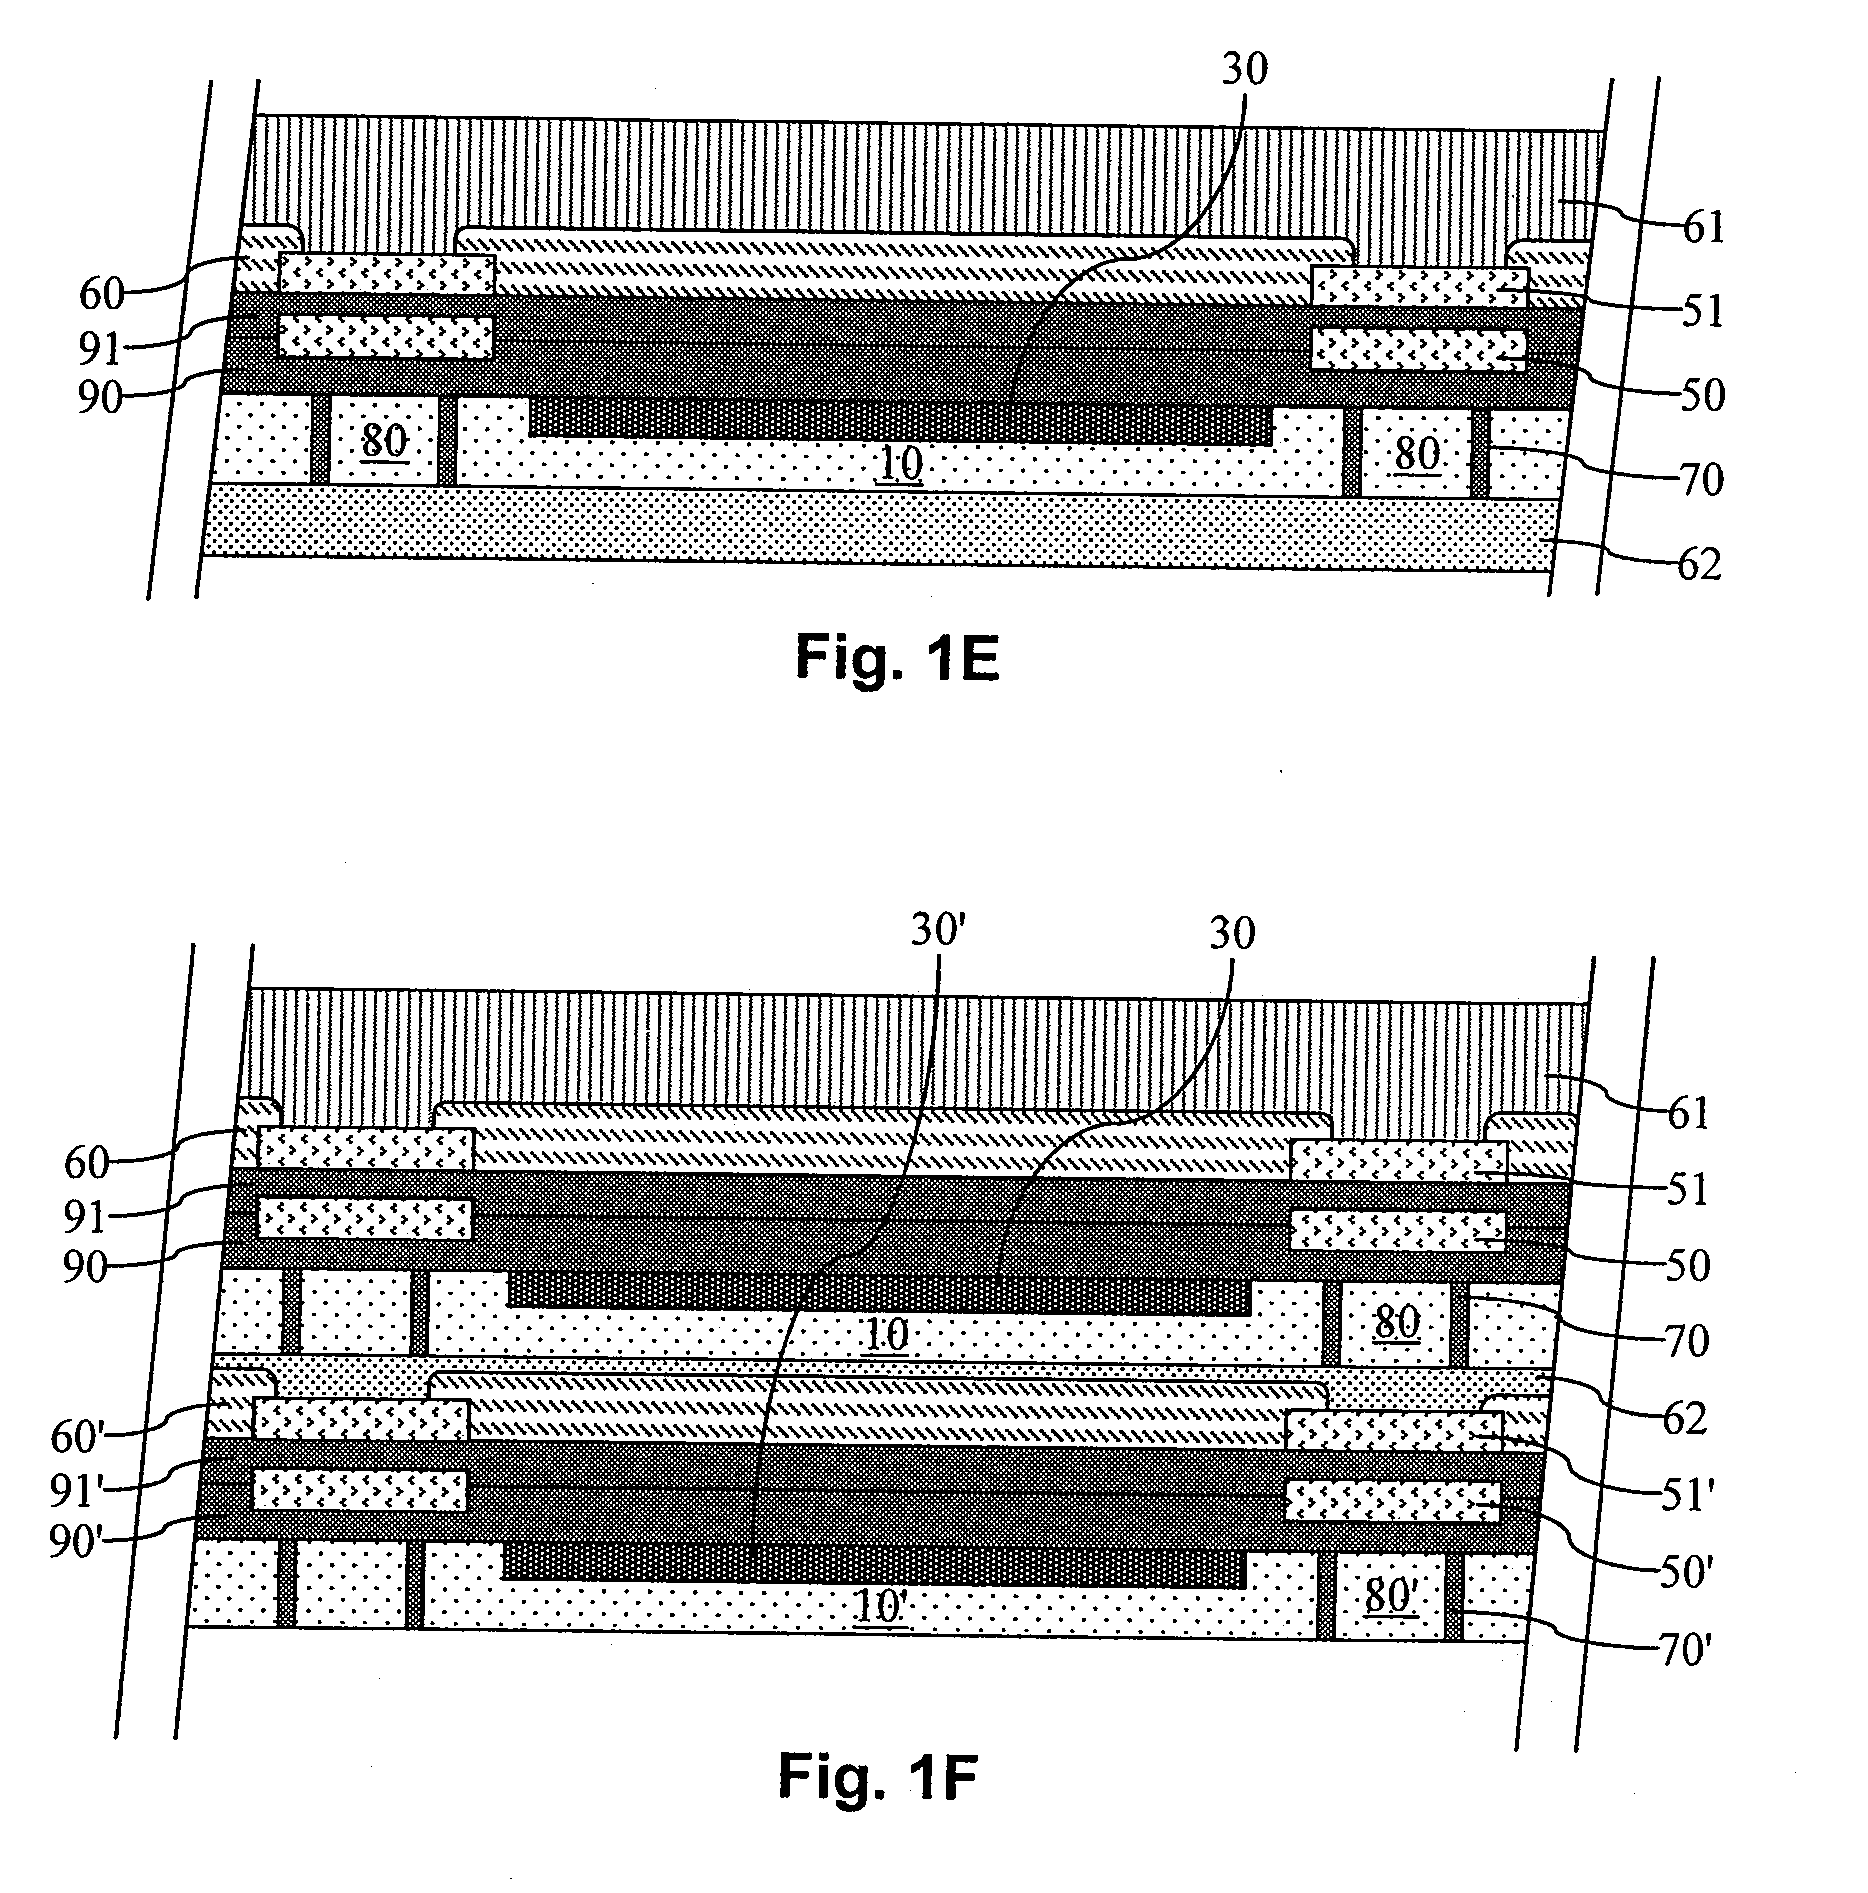 Method for stacking and interconnecting integrated circuits